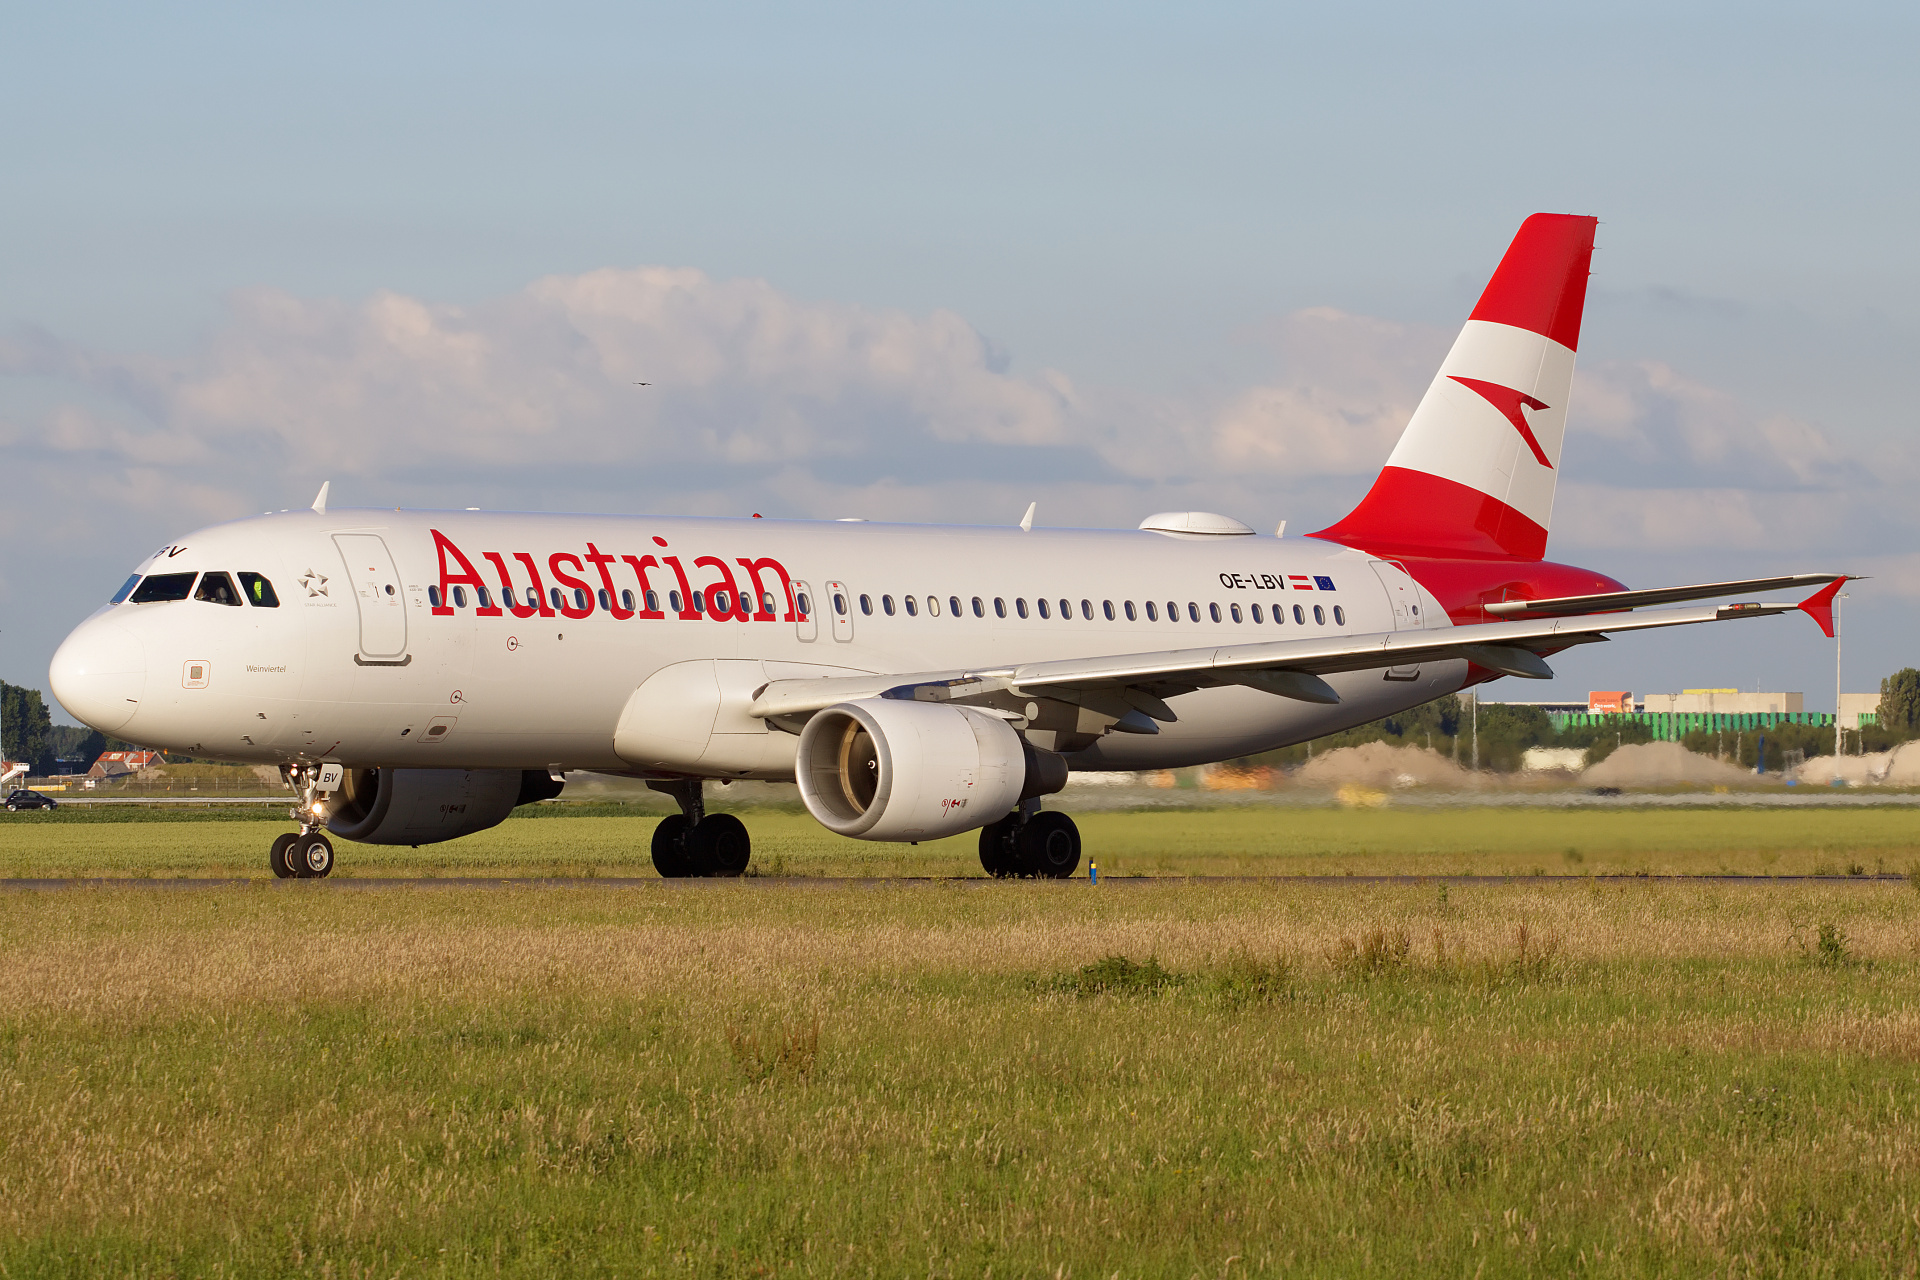 OE-LBV, Austrian Airlines (Aircraft » Schiphol Spotting » Airbus A320-200)